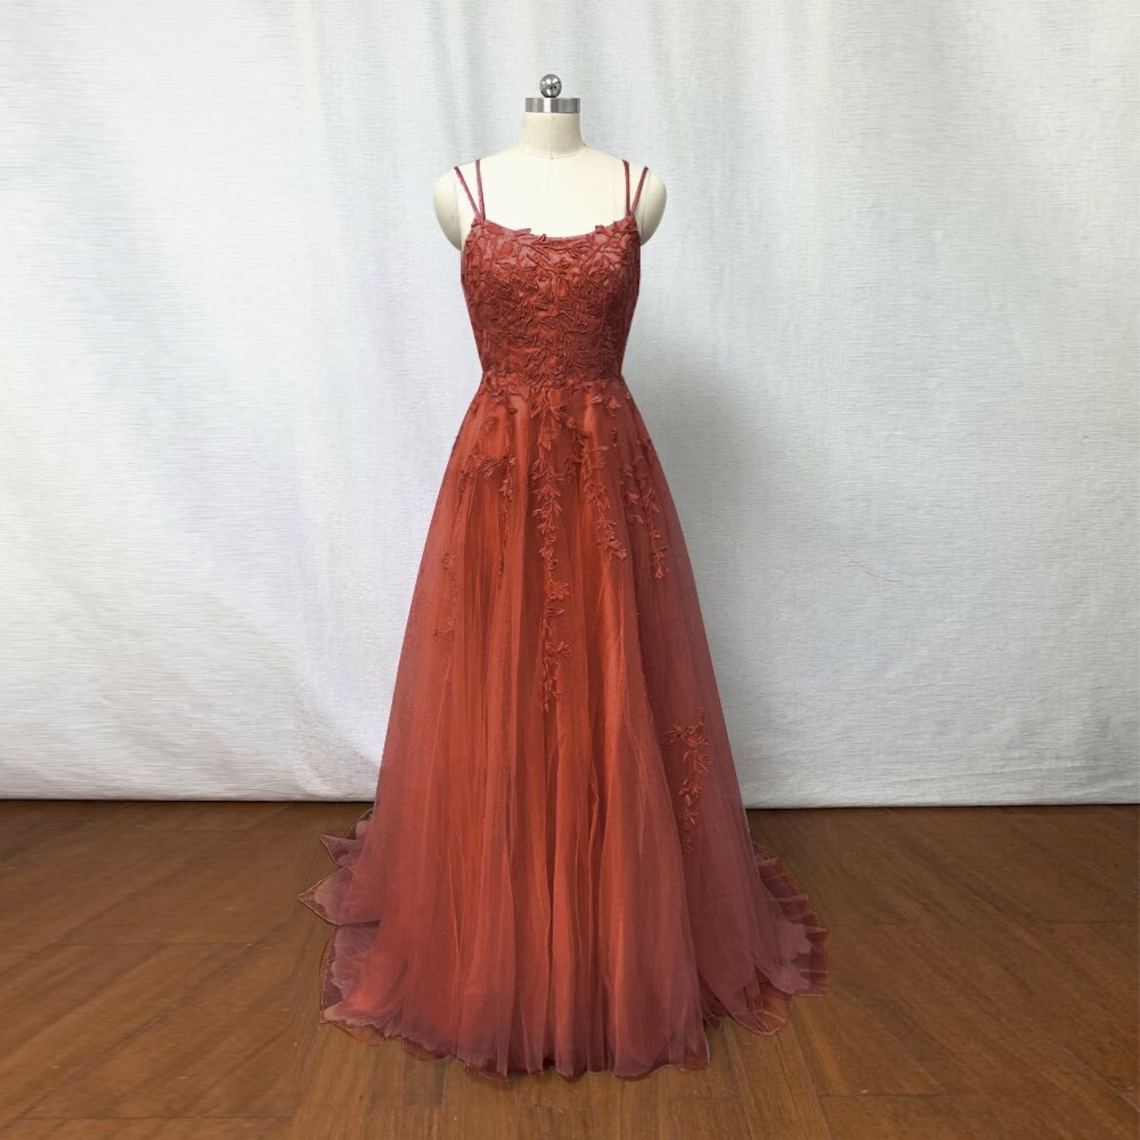 Burnt Orange Tulle Long Prom Dress With Lace Details